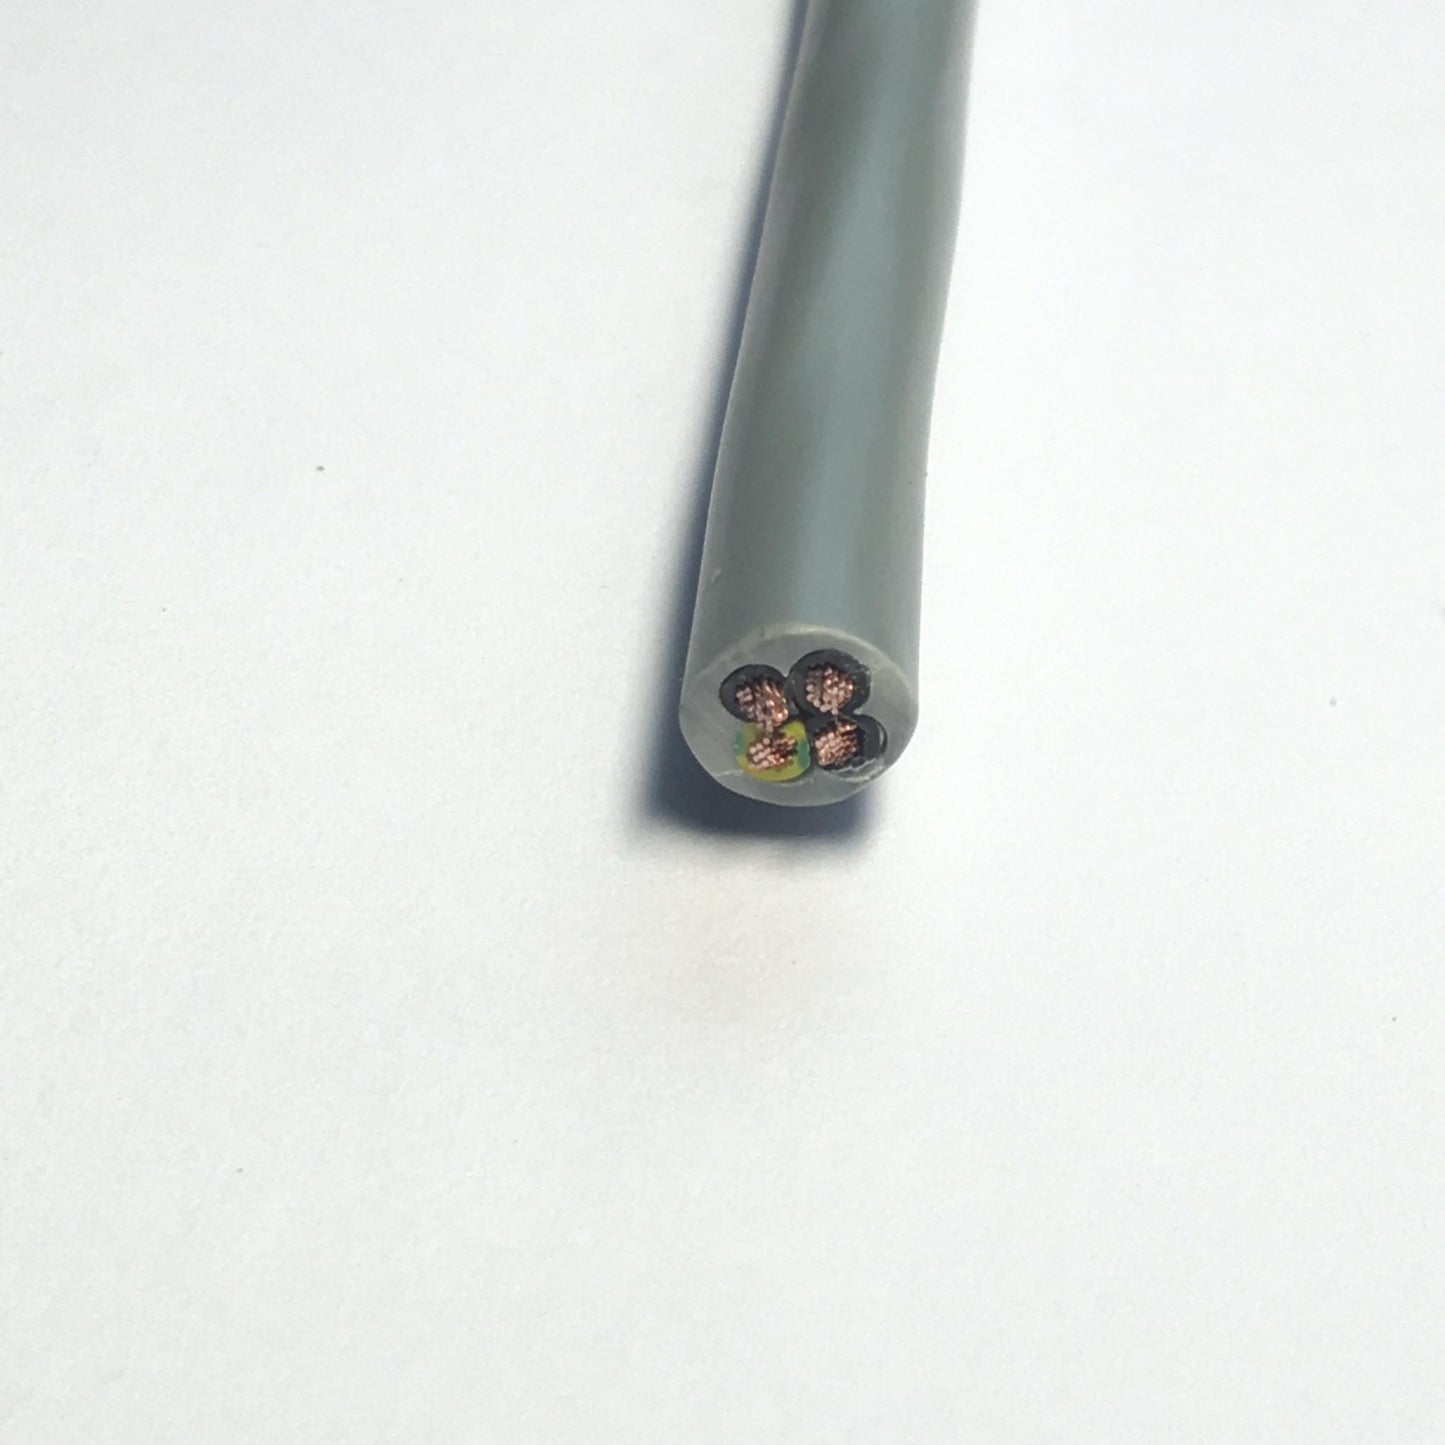 4 x 1.5mm YY Cable